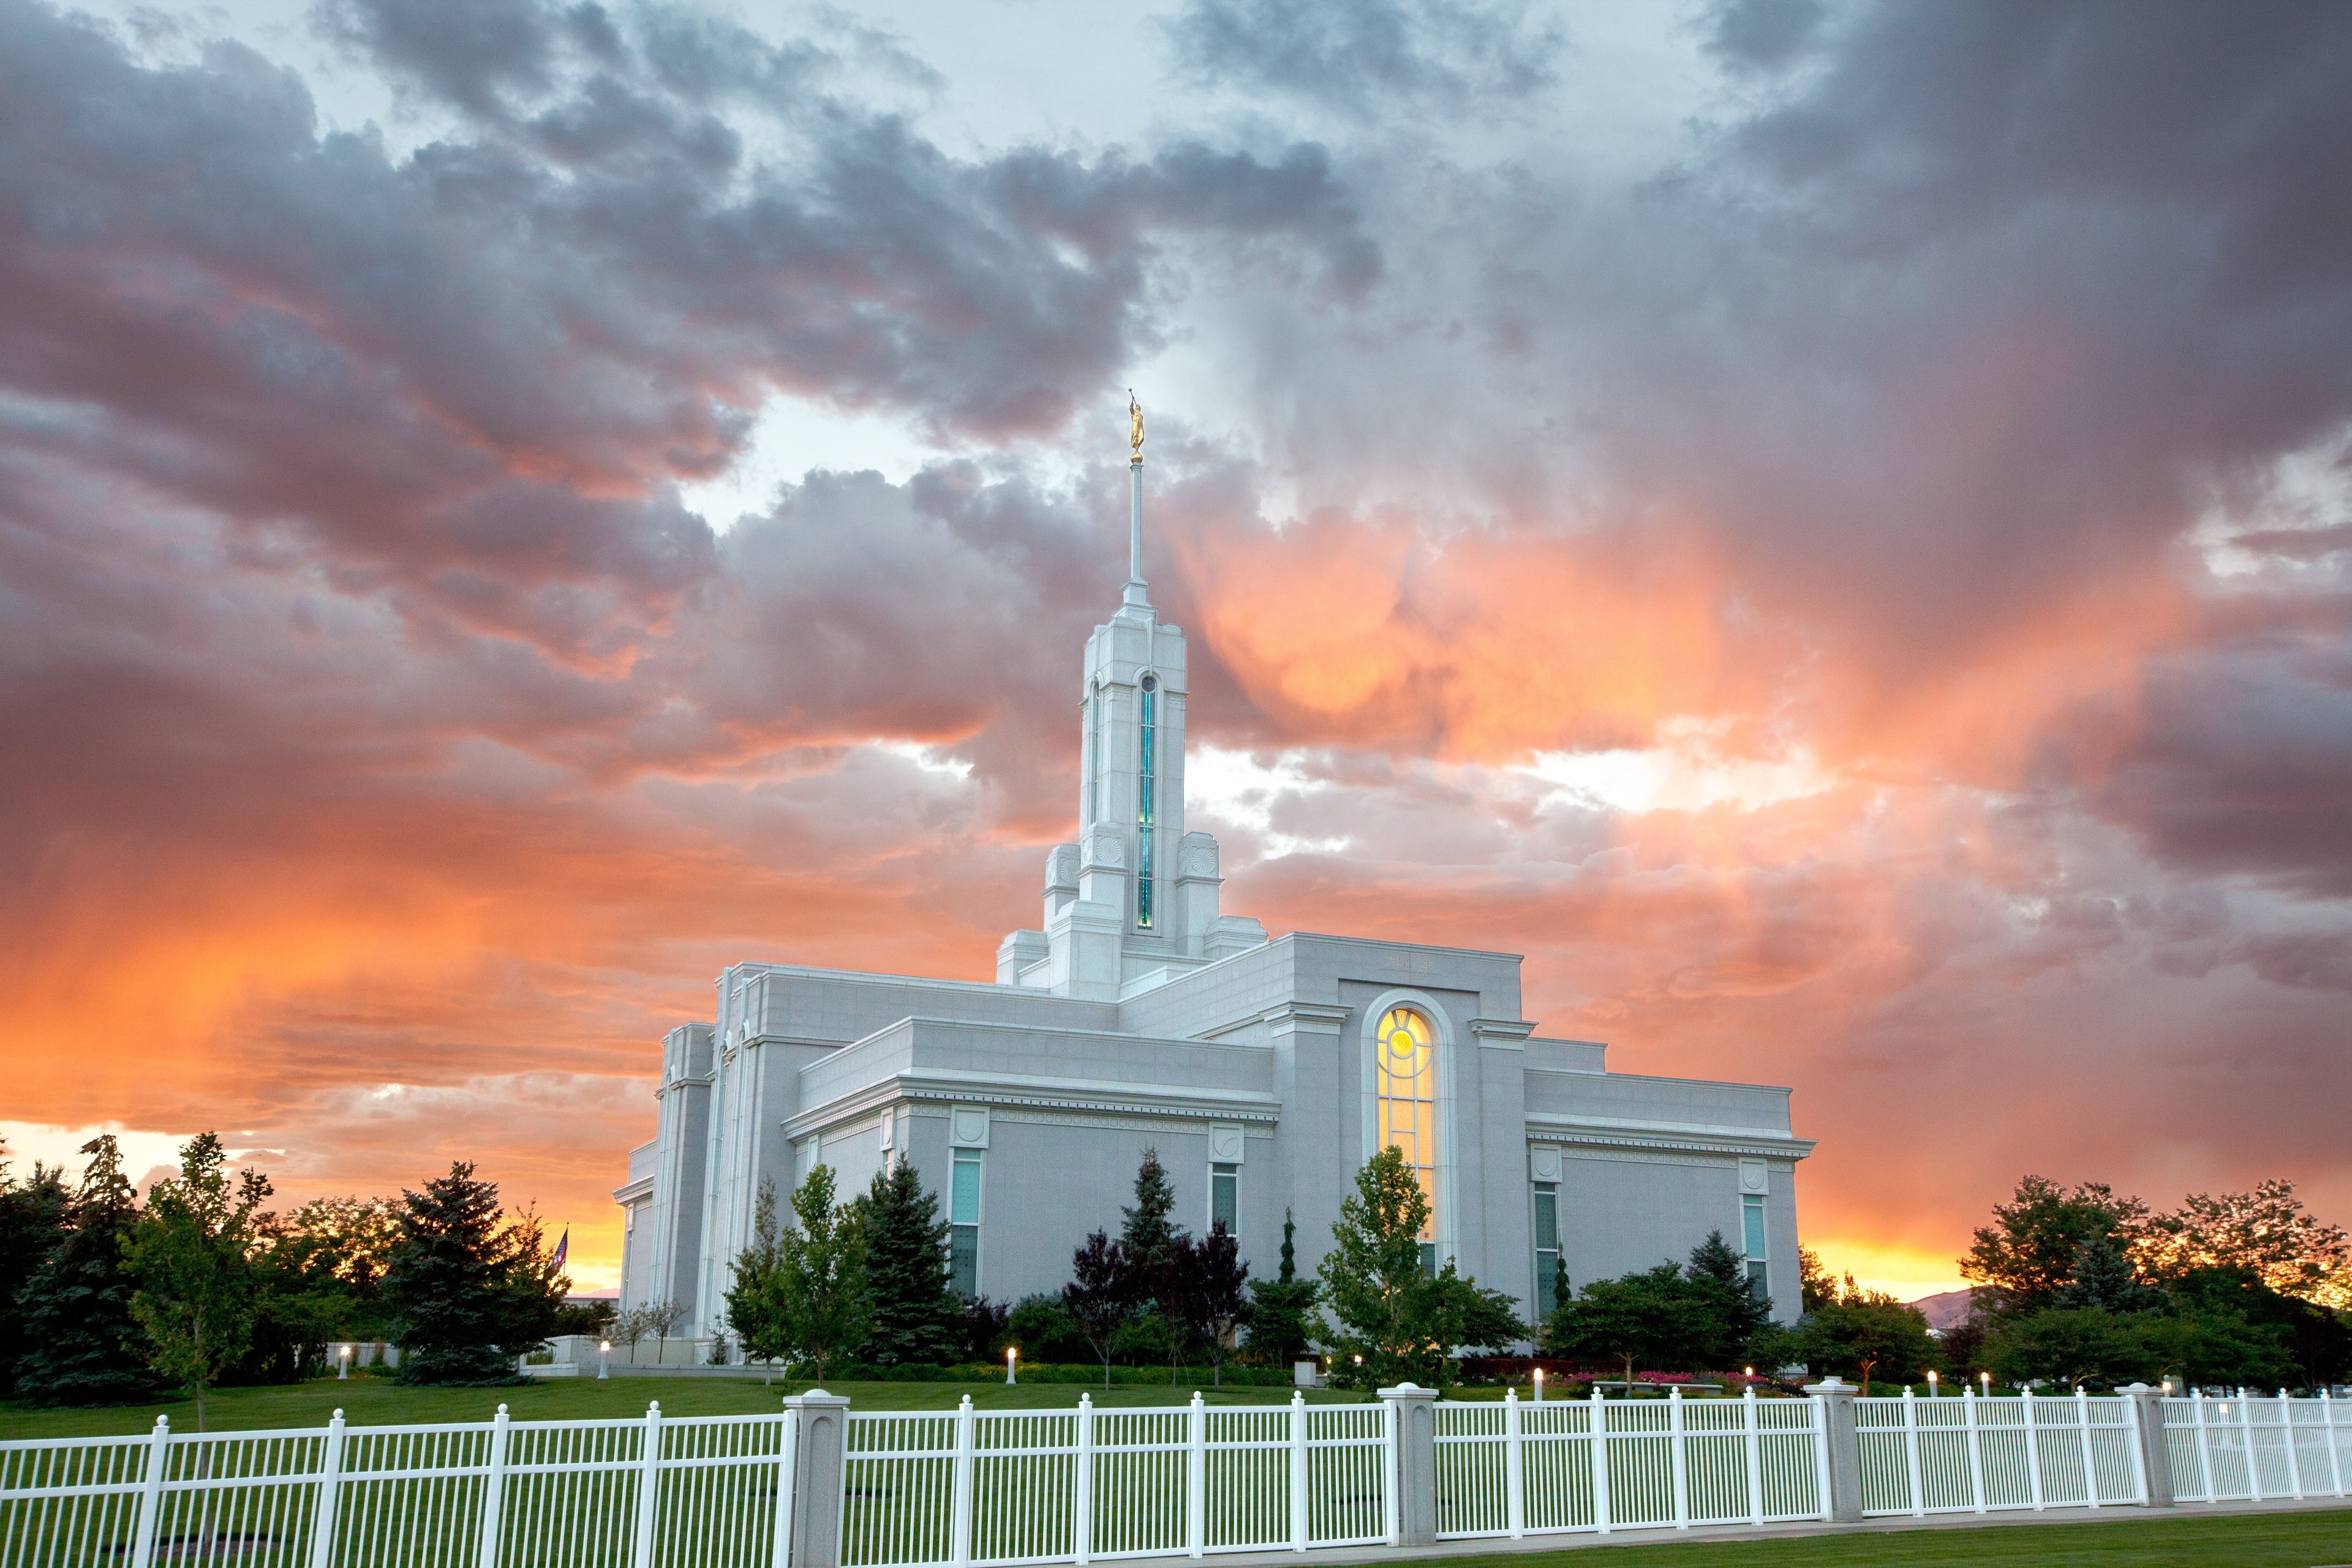 The Mount Timpanogos Utah Temple at sunset, including the grounds.